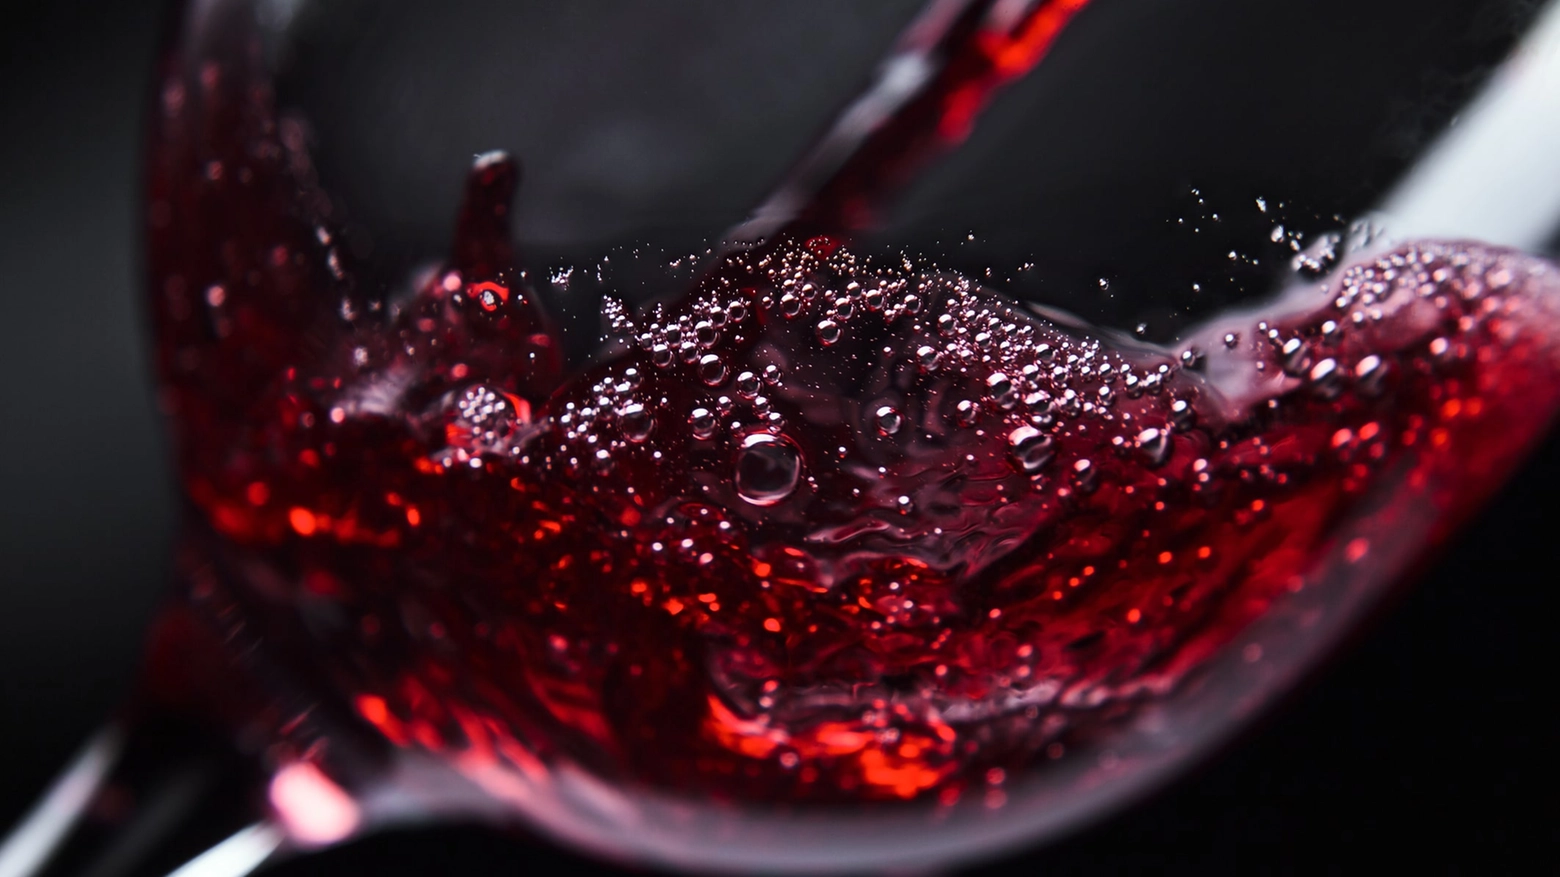 Red wine being poured into wine glass